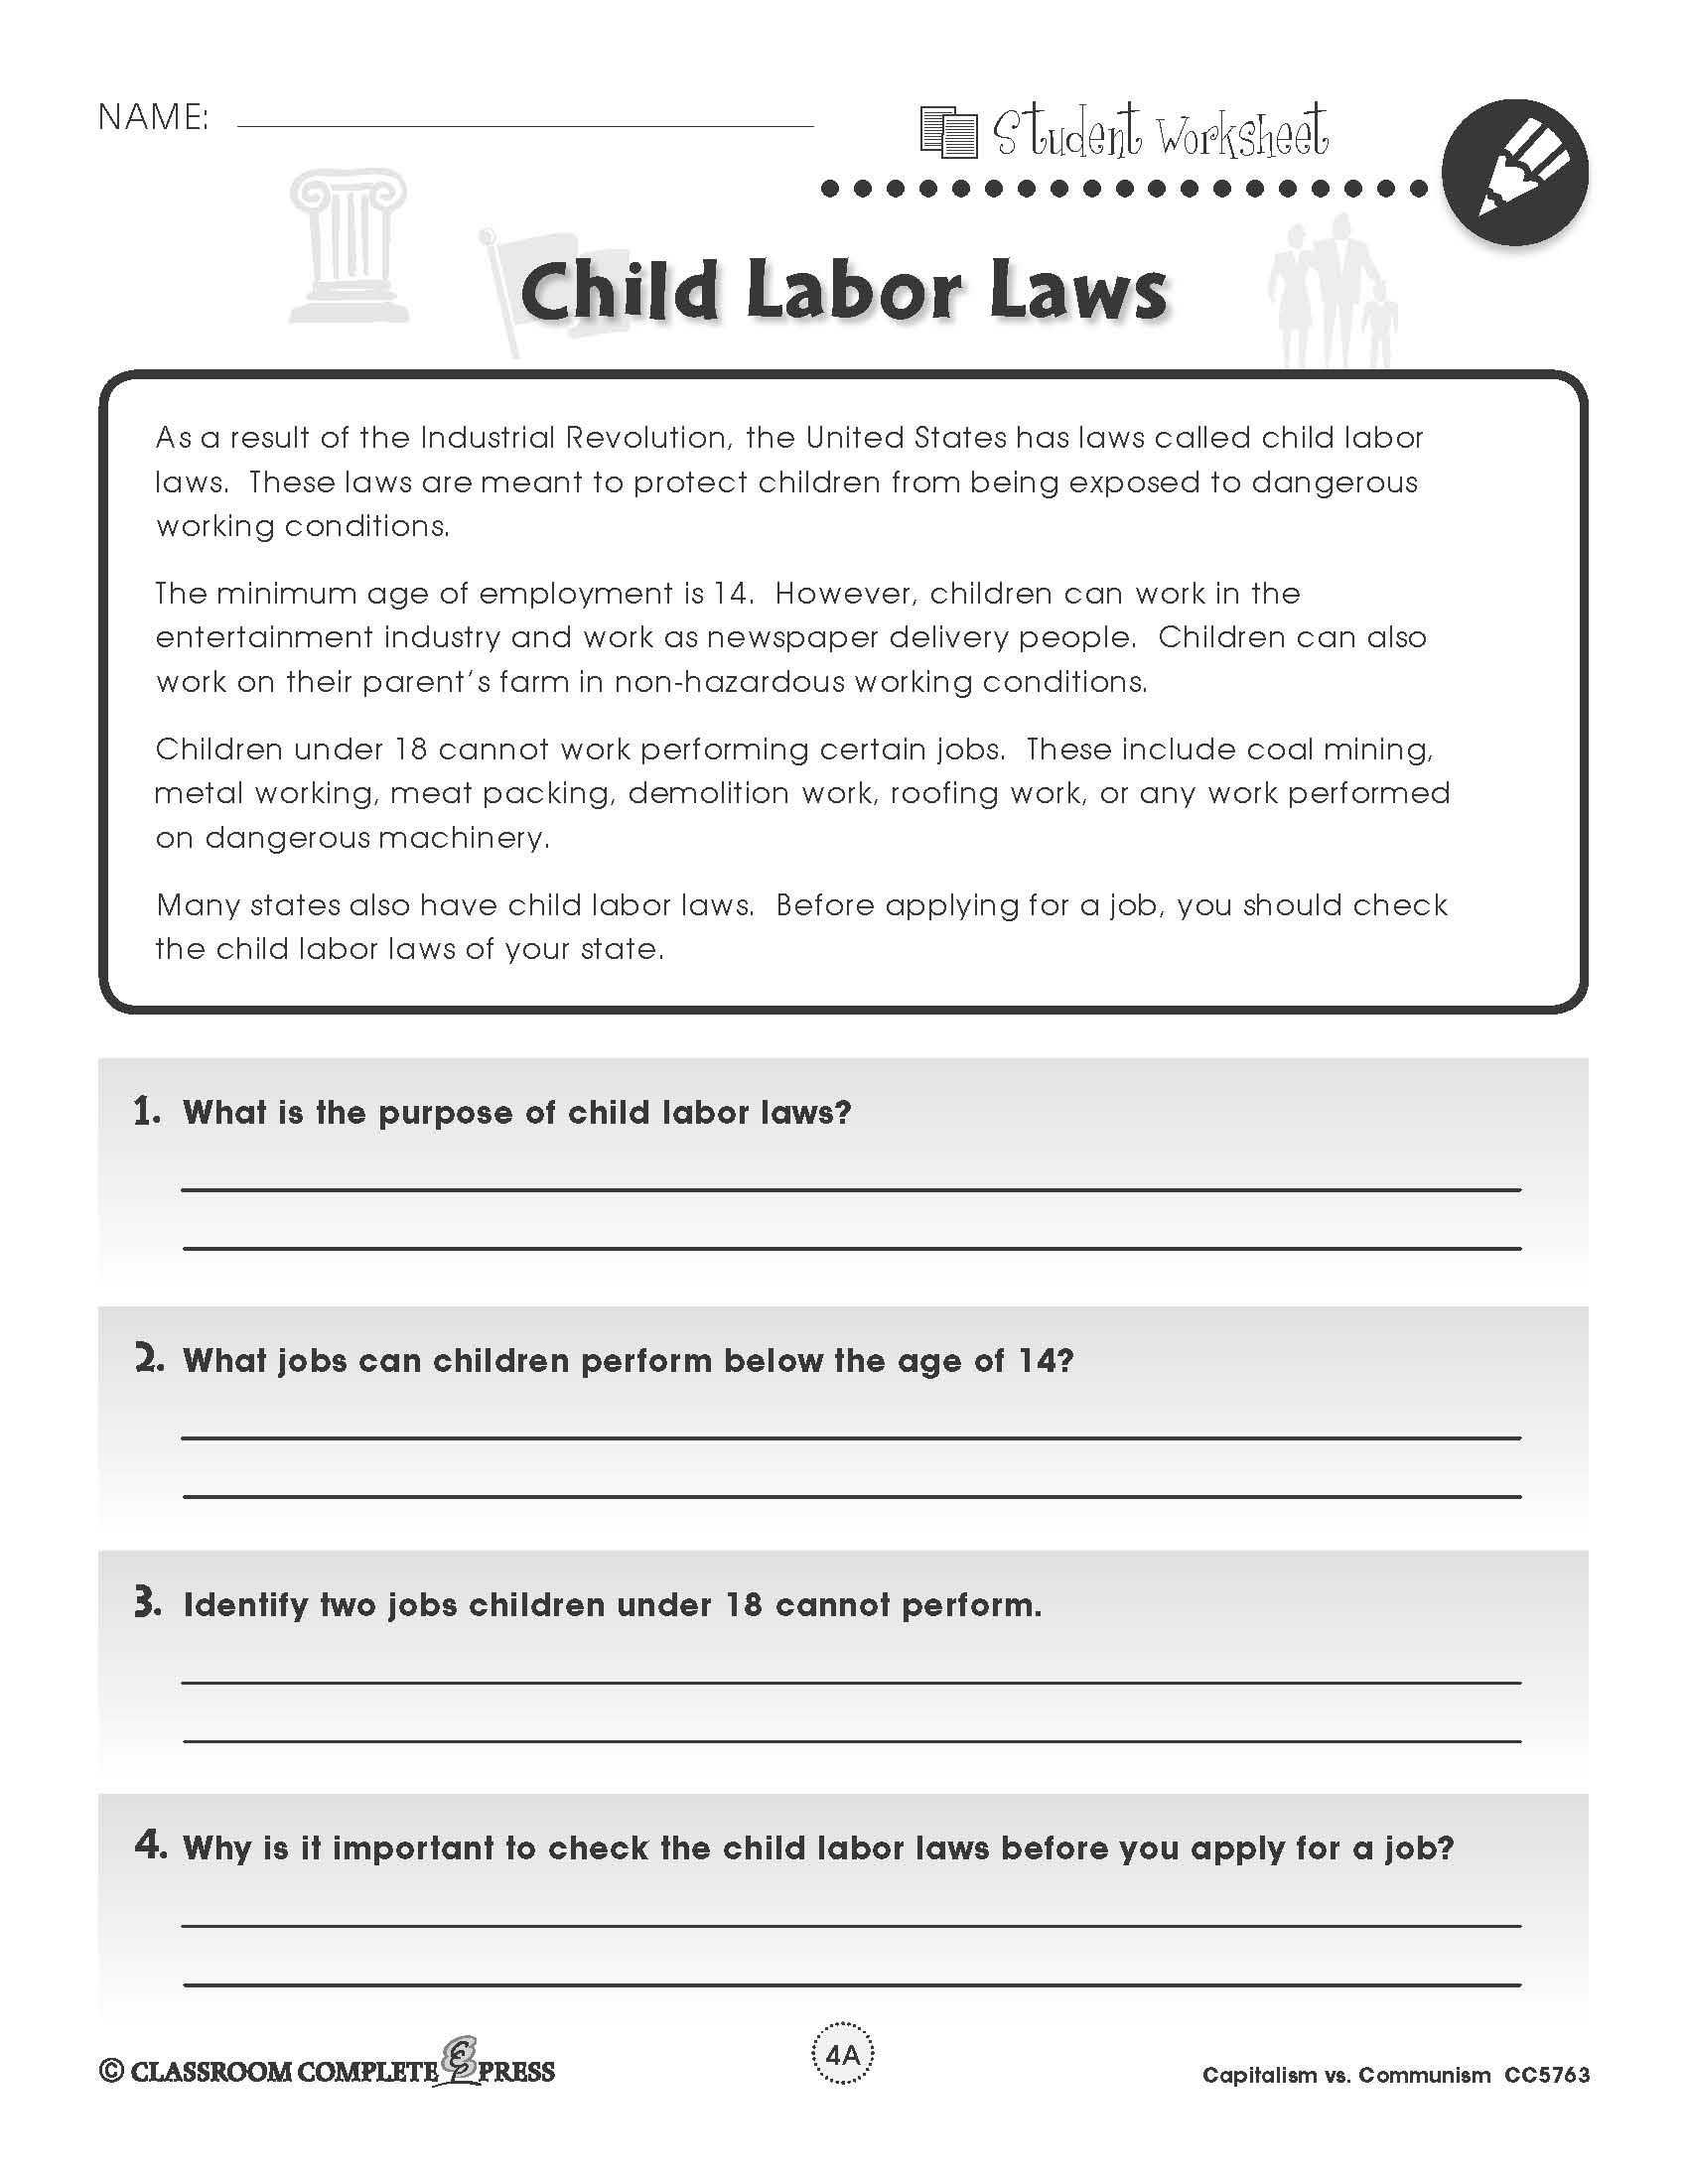 Weaknesses Of the Articles Of Confederation Worksheet as Well as Learn About Child Labor Laws In the U S In This Free Activity From